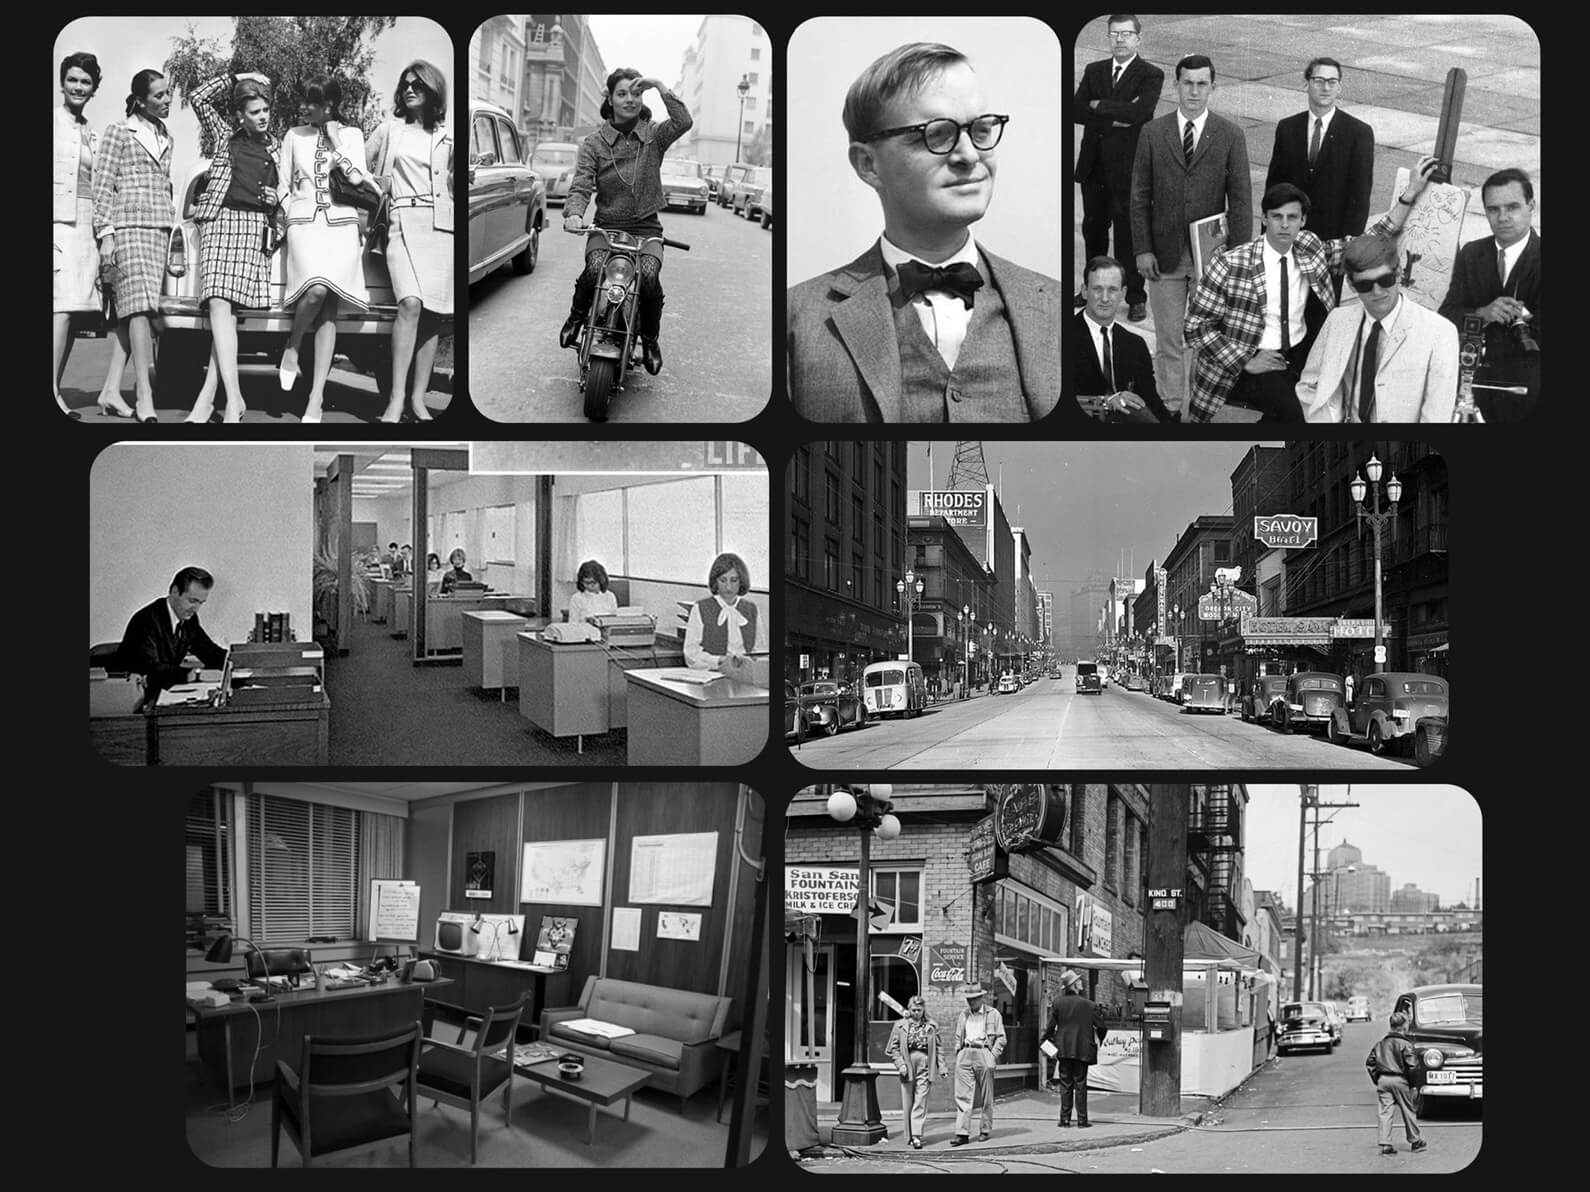 50's era black and white photographs depicting fashion and stylistic inspiration for Orientation Center for the Unseen